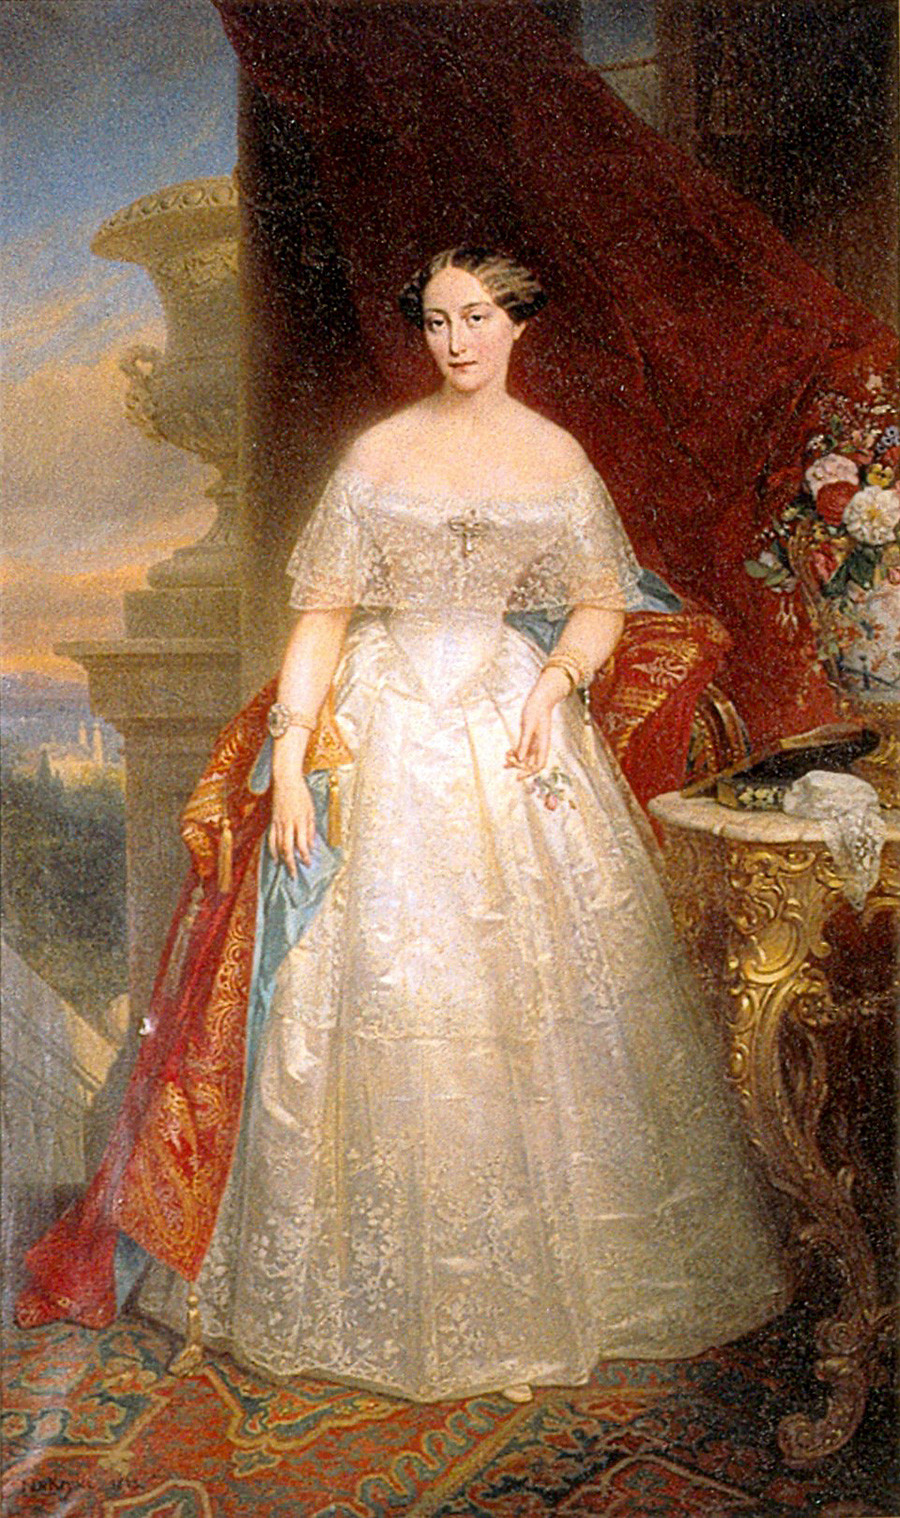 Portrait of Olga of Russia (1822-1892), Princess of Württemberg by Nicaise de Keyser